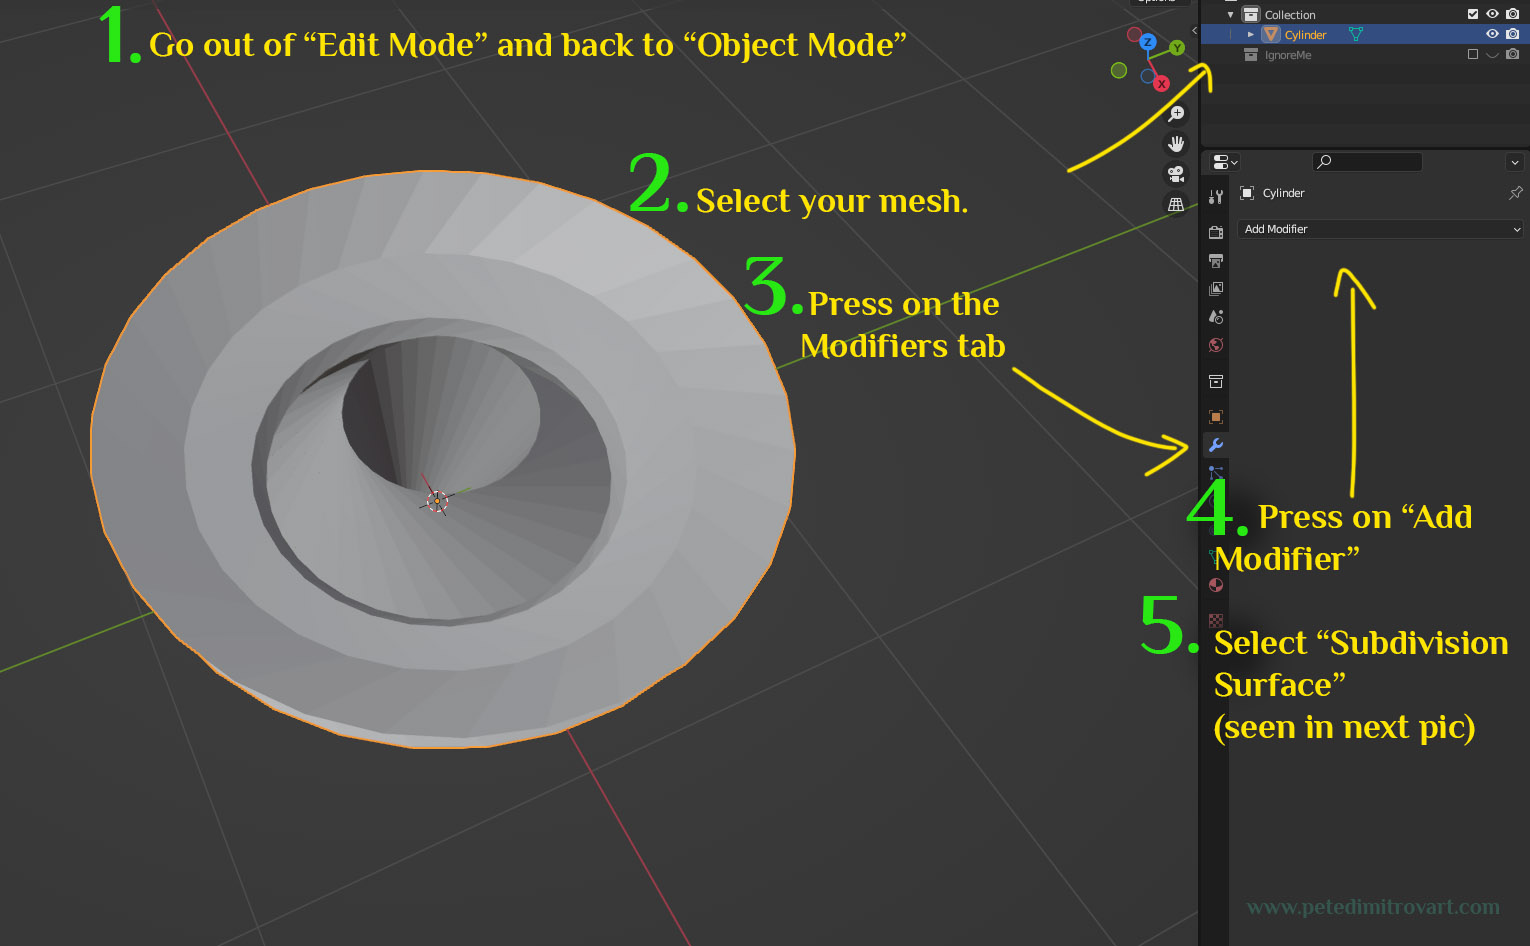 Screenshot that shows going out of Edit and to Object mode. The mesh is selected but has no wireframe due to us being in Object Mode. Arrow points to select the mesh from the Collection. Then another arrow points to go to the “Modifiers Tab” and then press and add “Subdivision Surface).